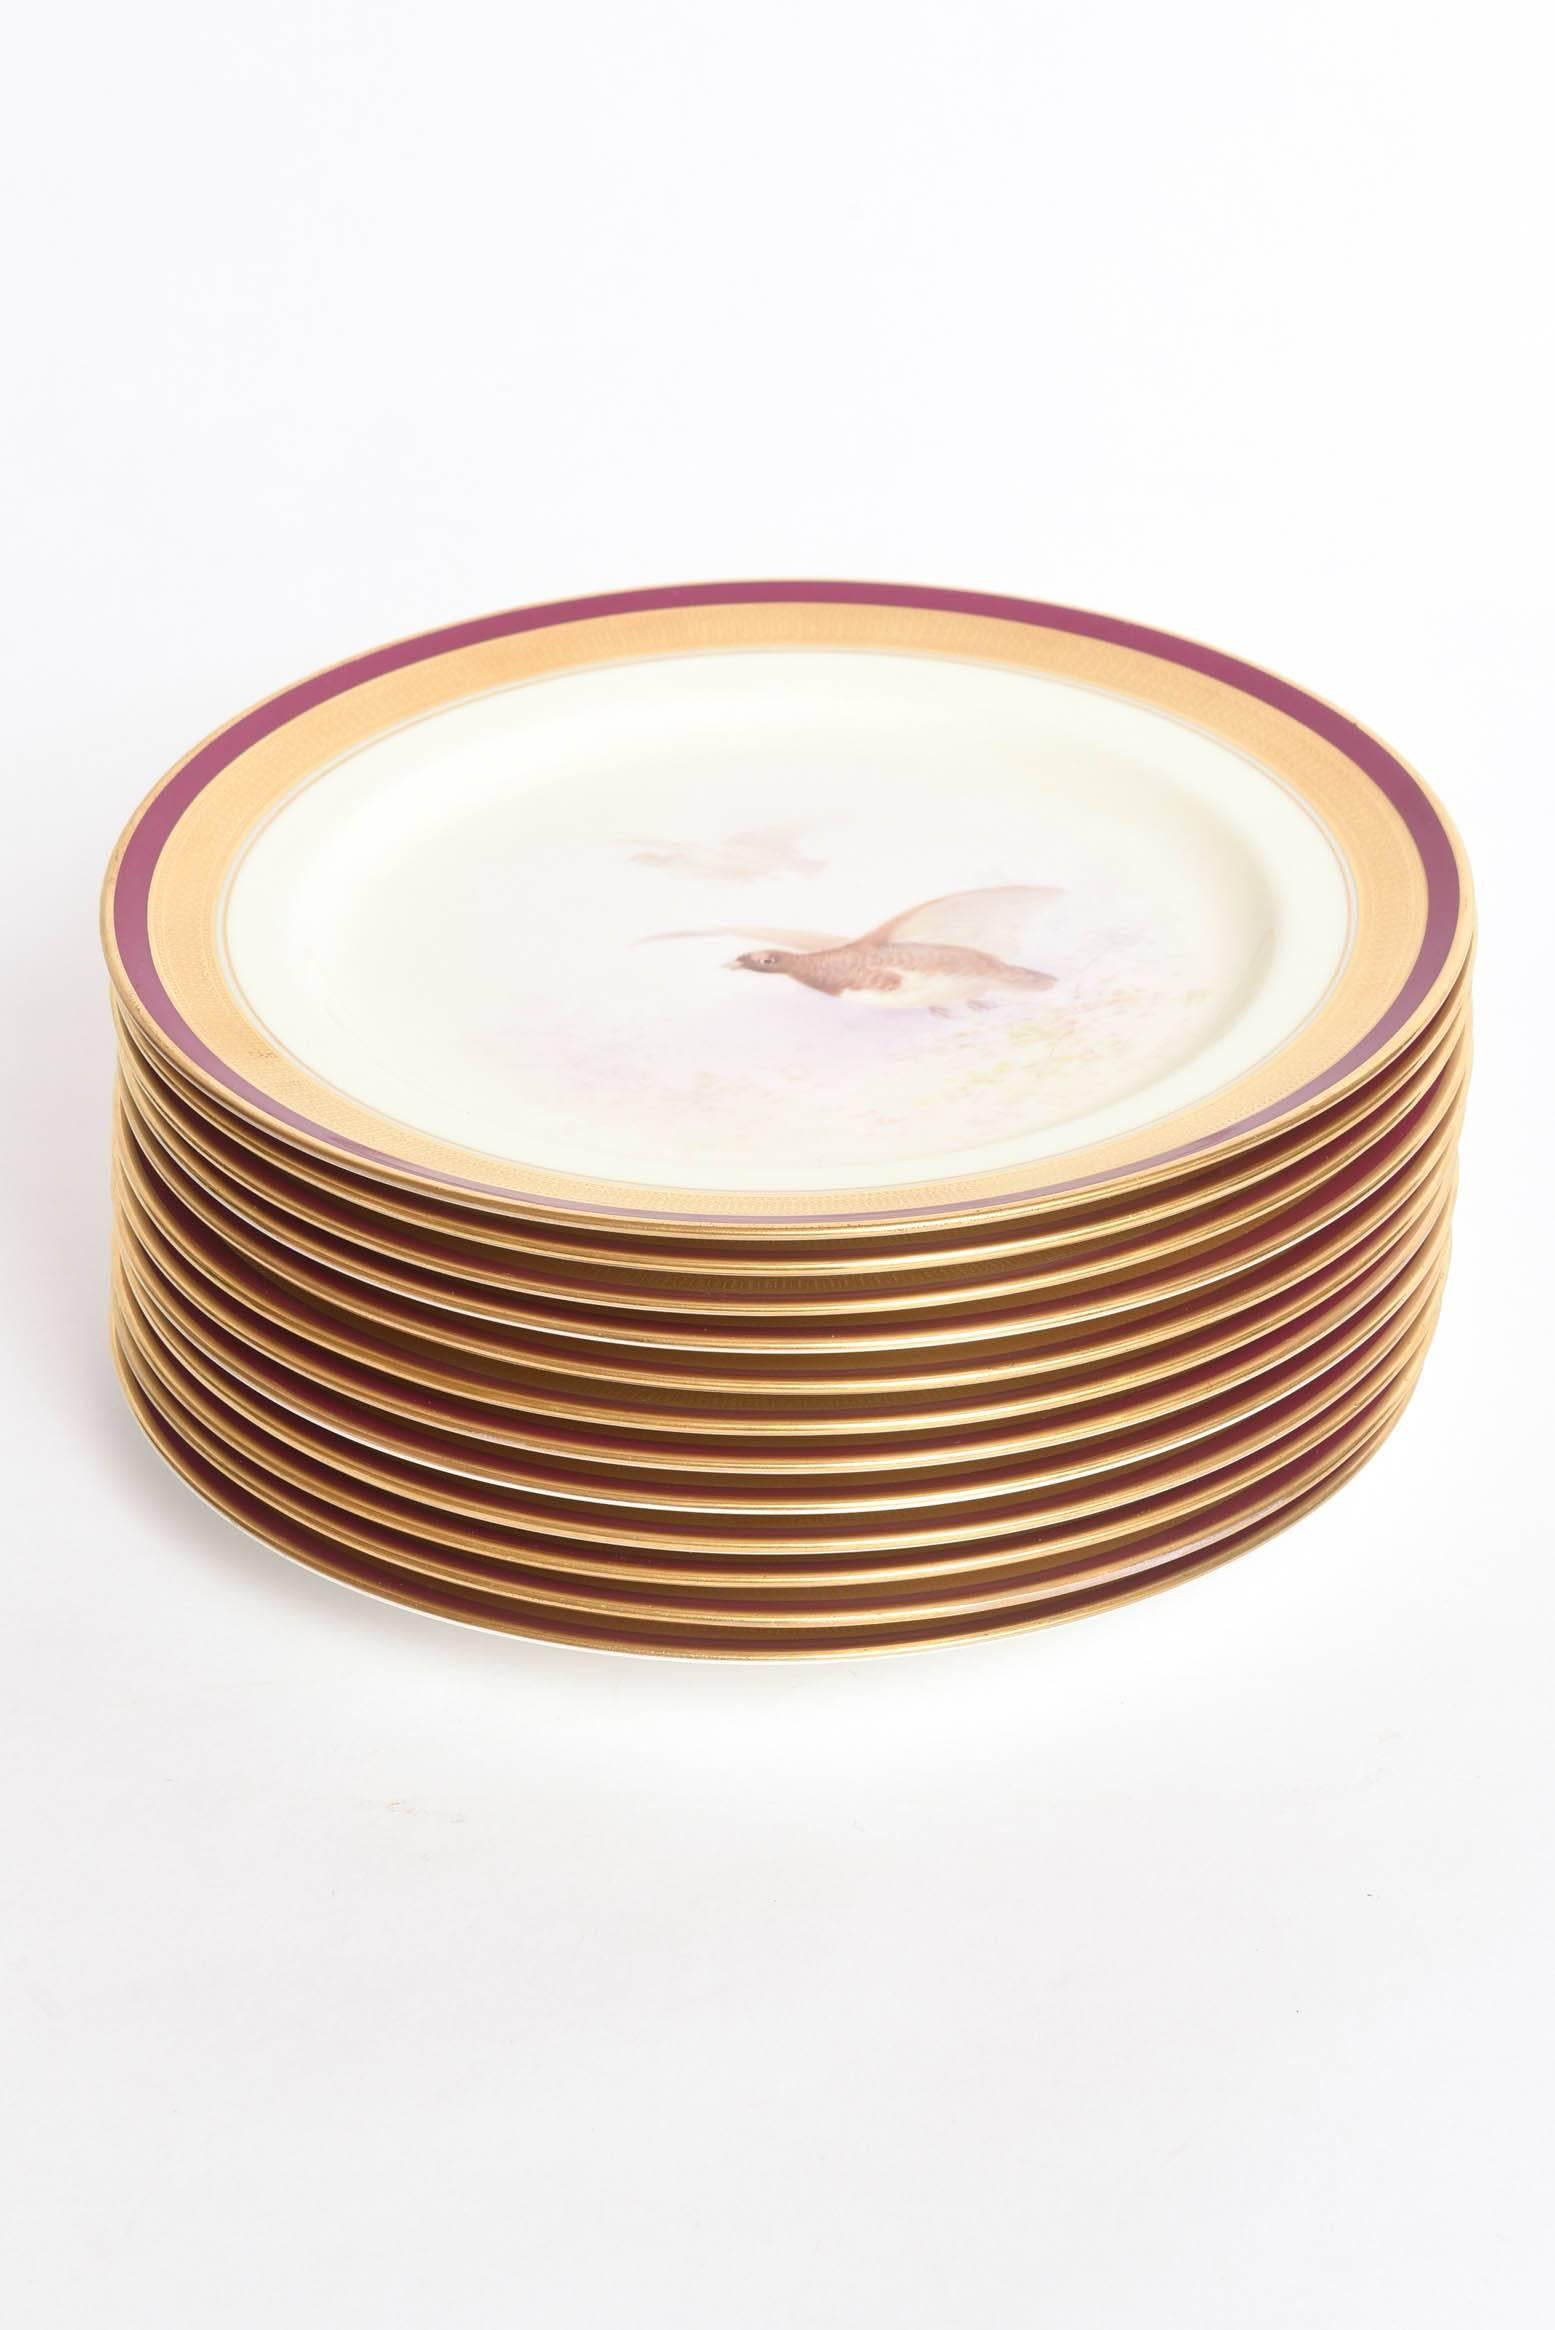 Hand-Crafted 12 Game Bird Plates, Hand-Painted & Artist Signed. Rare Ruby Red Border, Antique